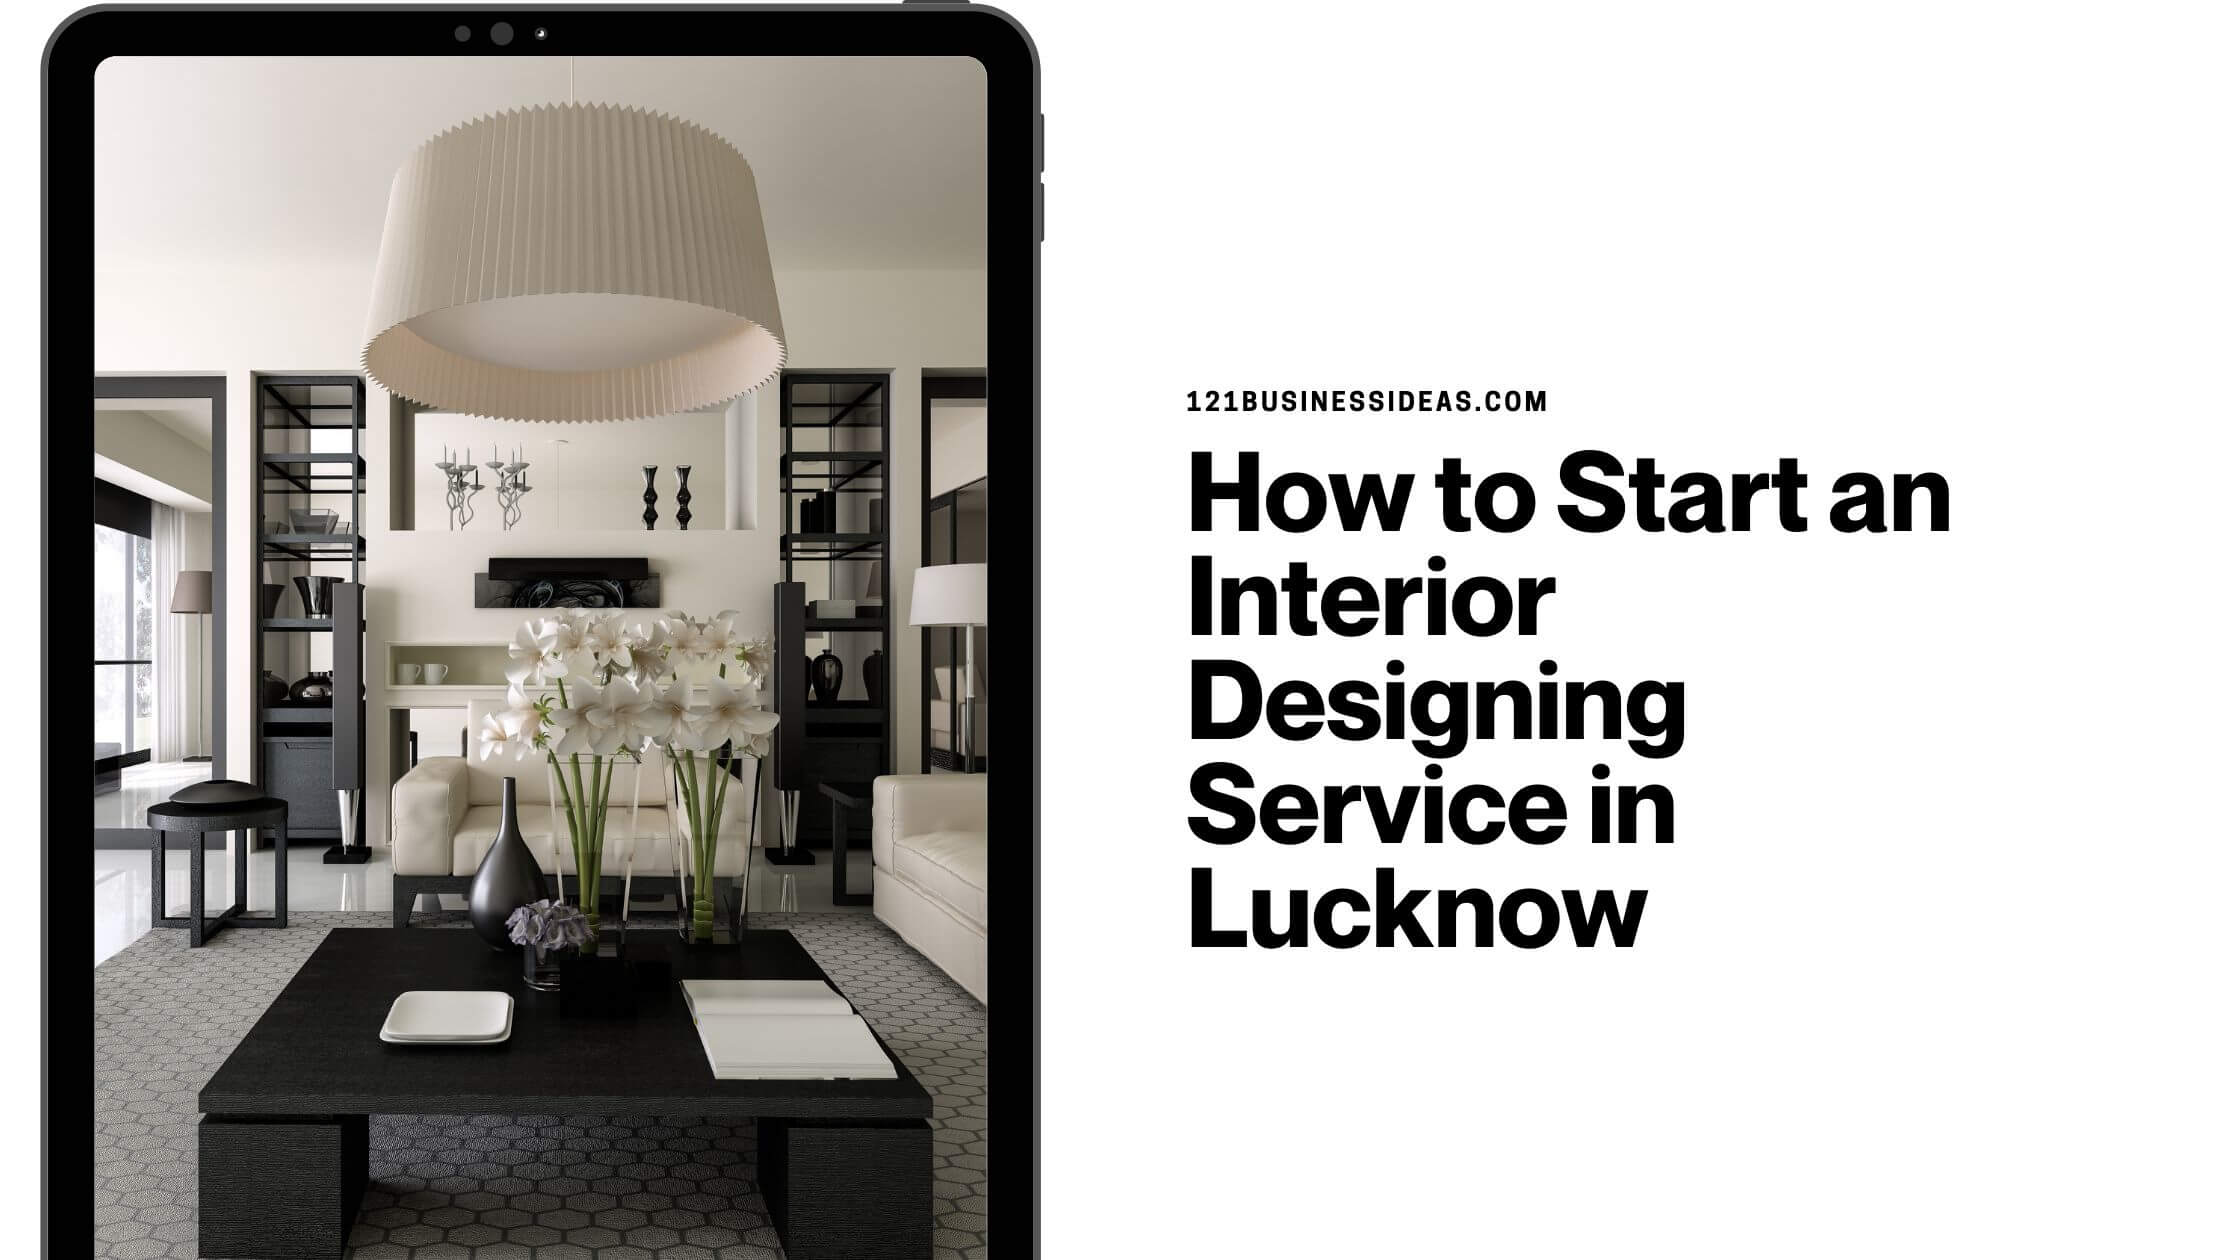 How to Start an Interior Designing Service in Lucknow (1)